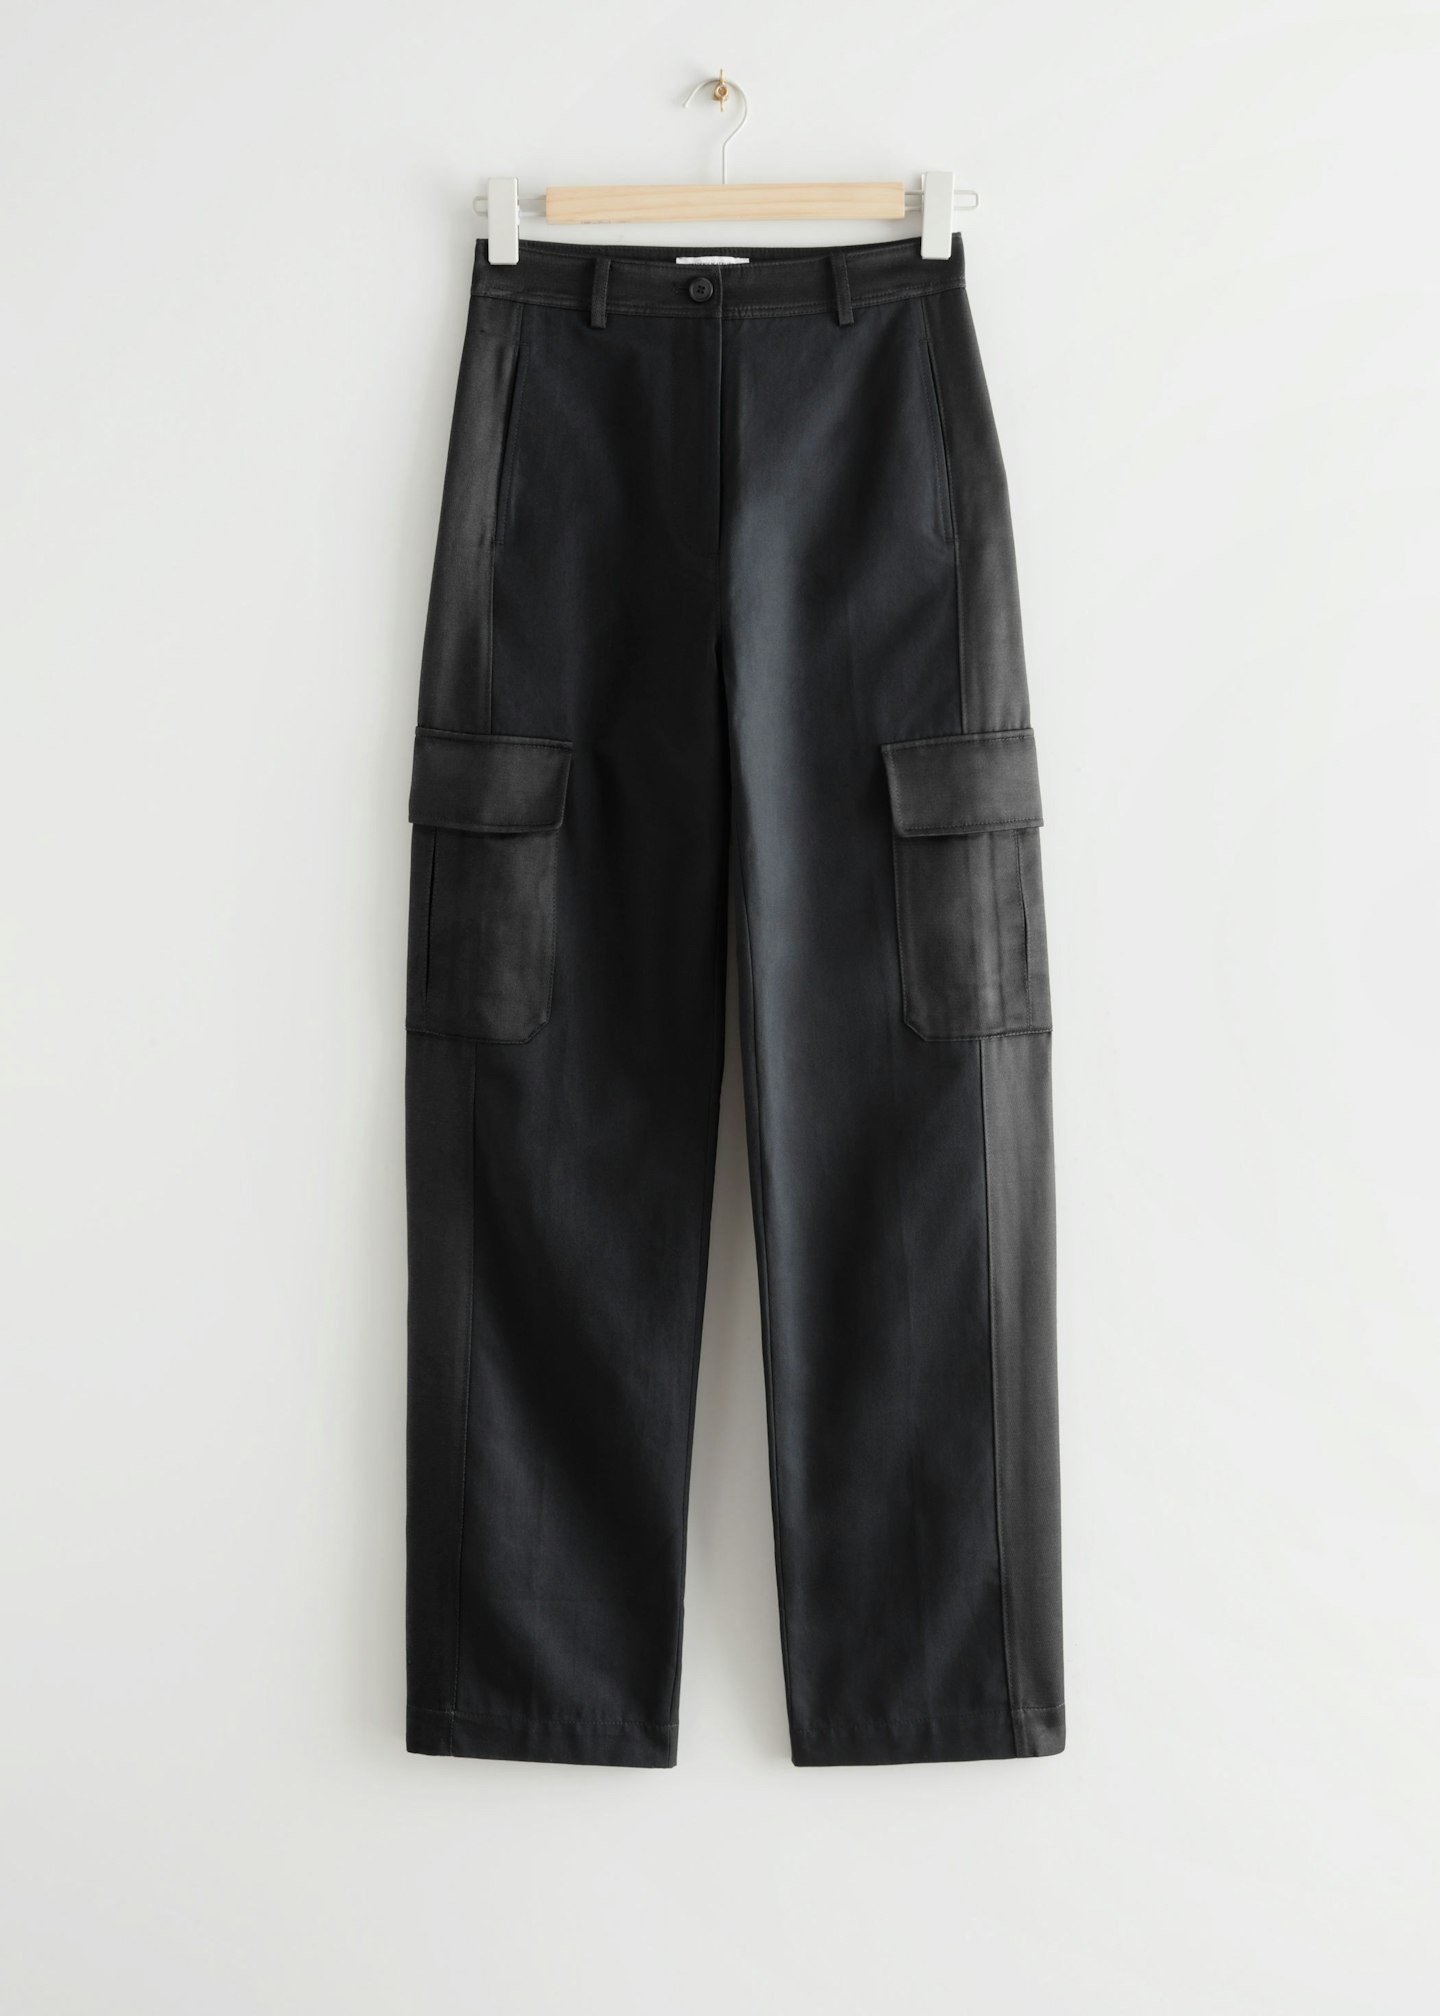 & Other Stories, Relaxed Cargo Trousers, £75